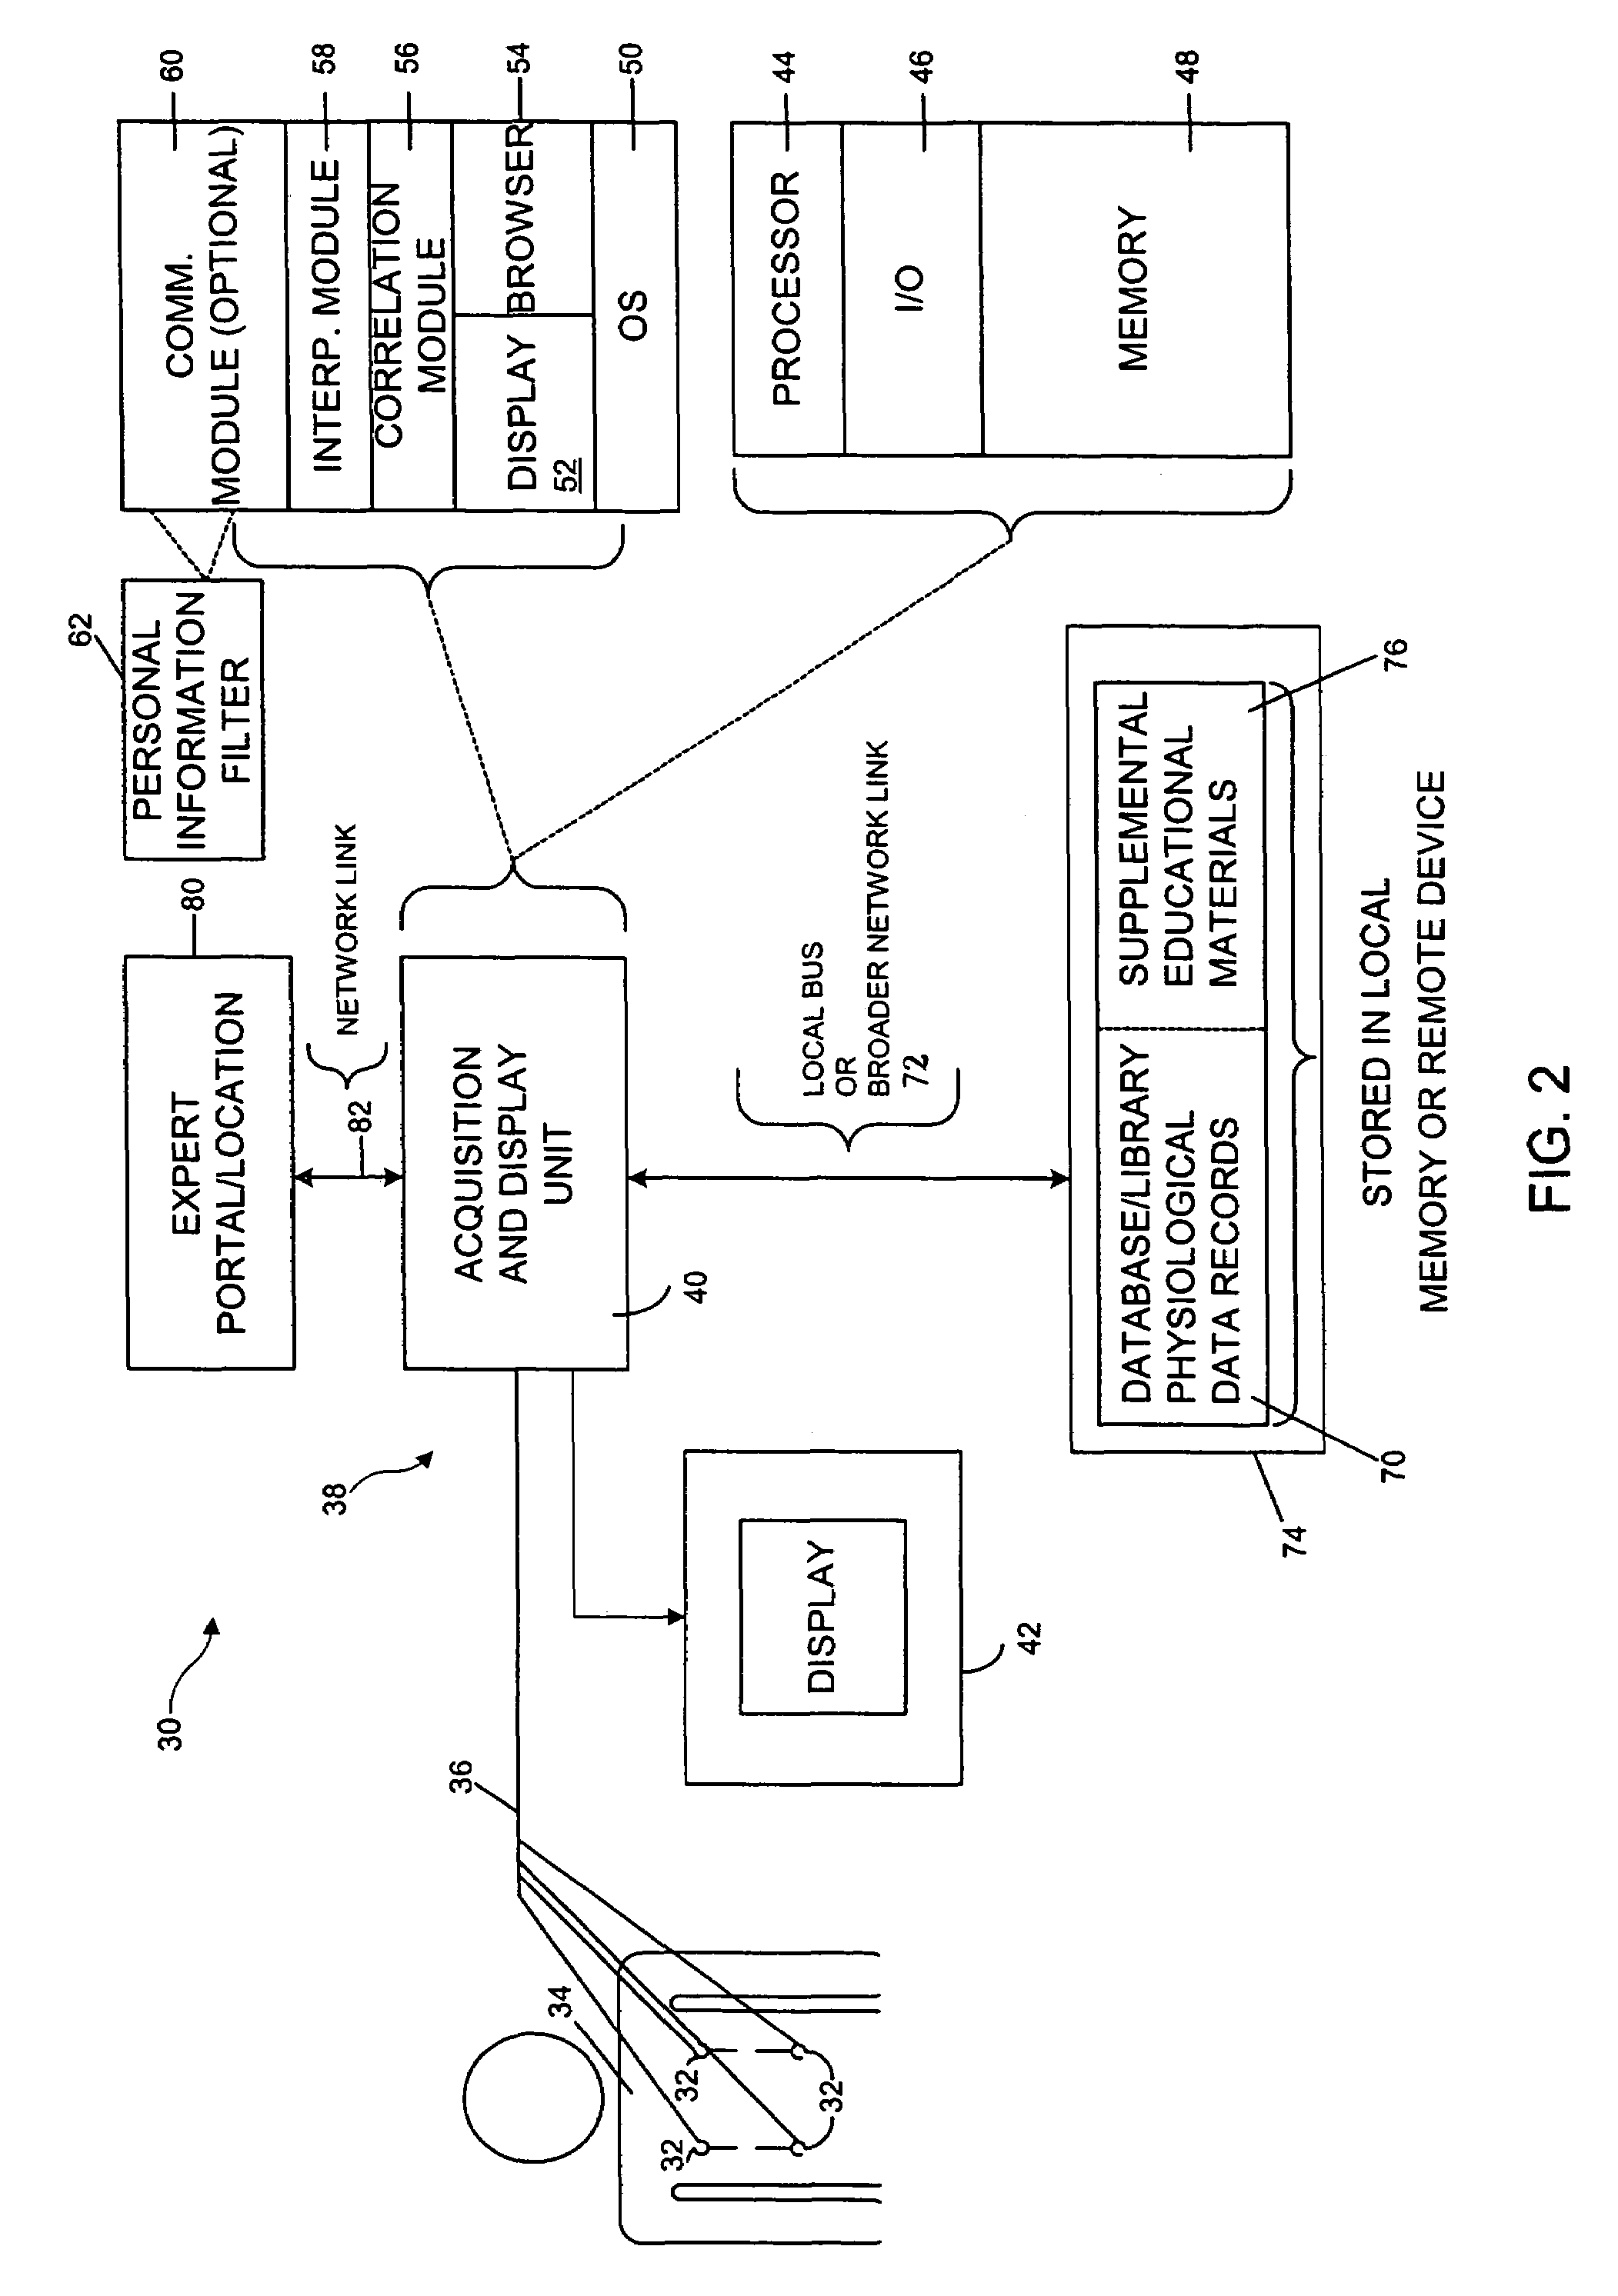 Method and apparatus for perioperative assessment of cardiovascular risk